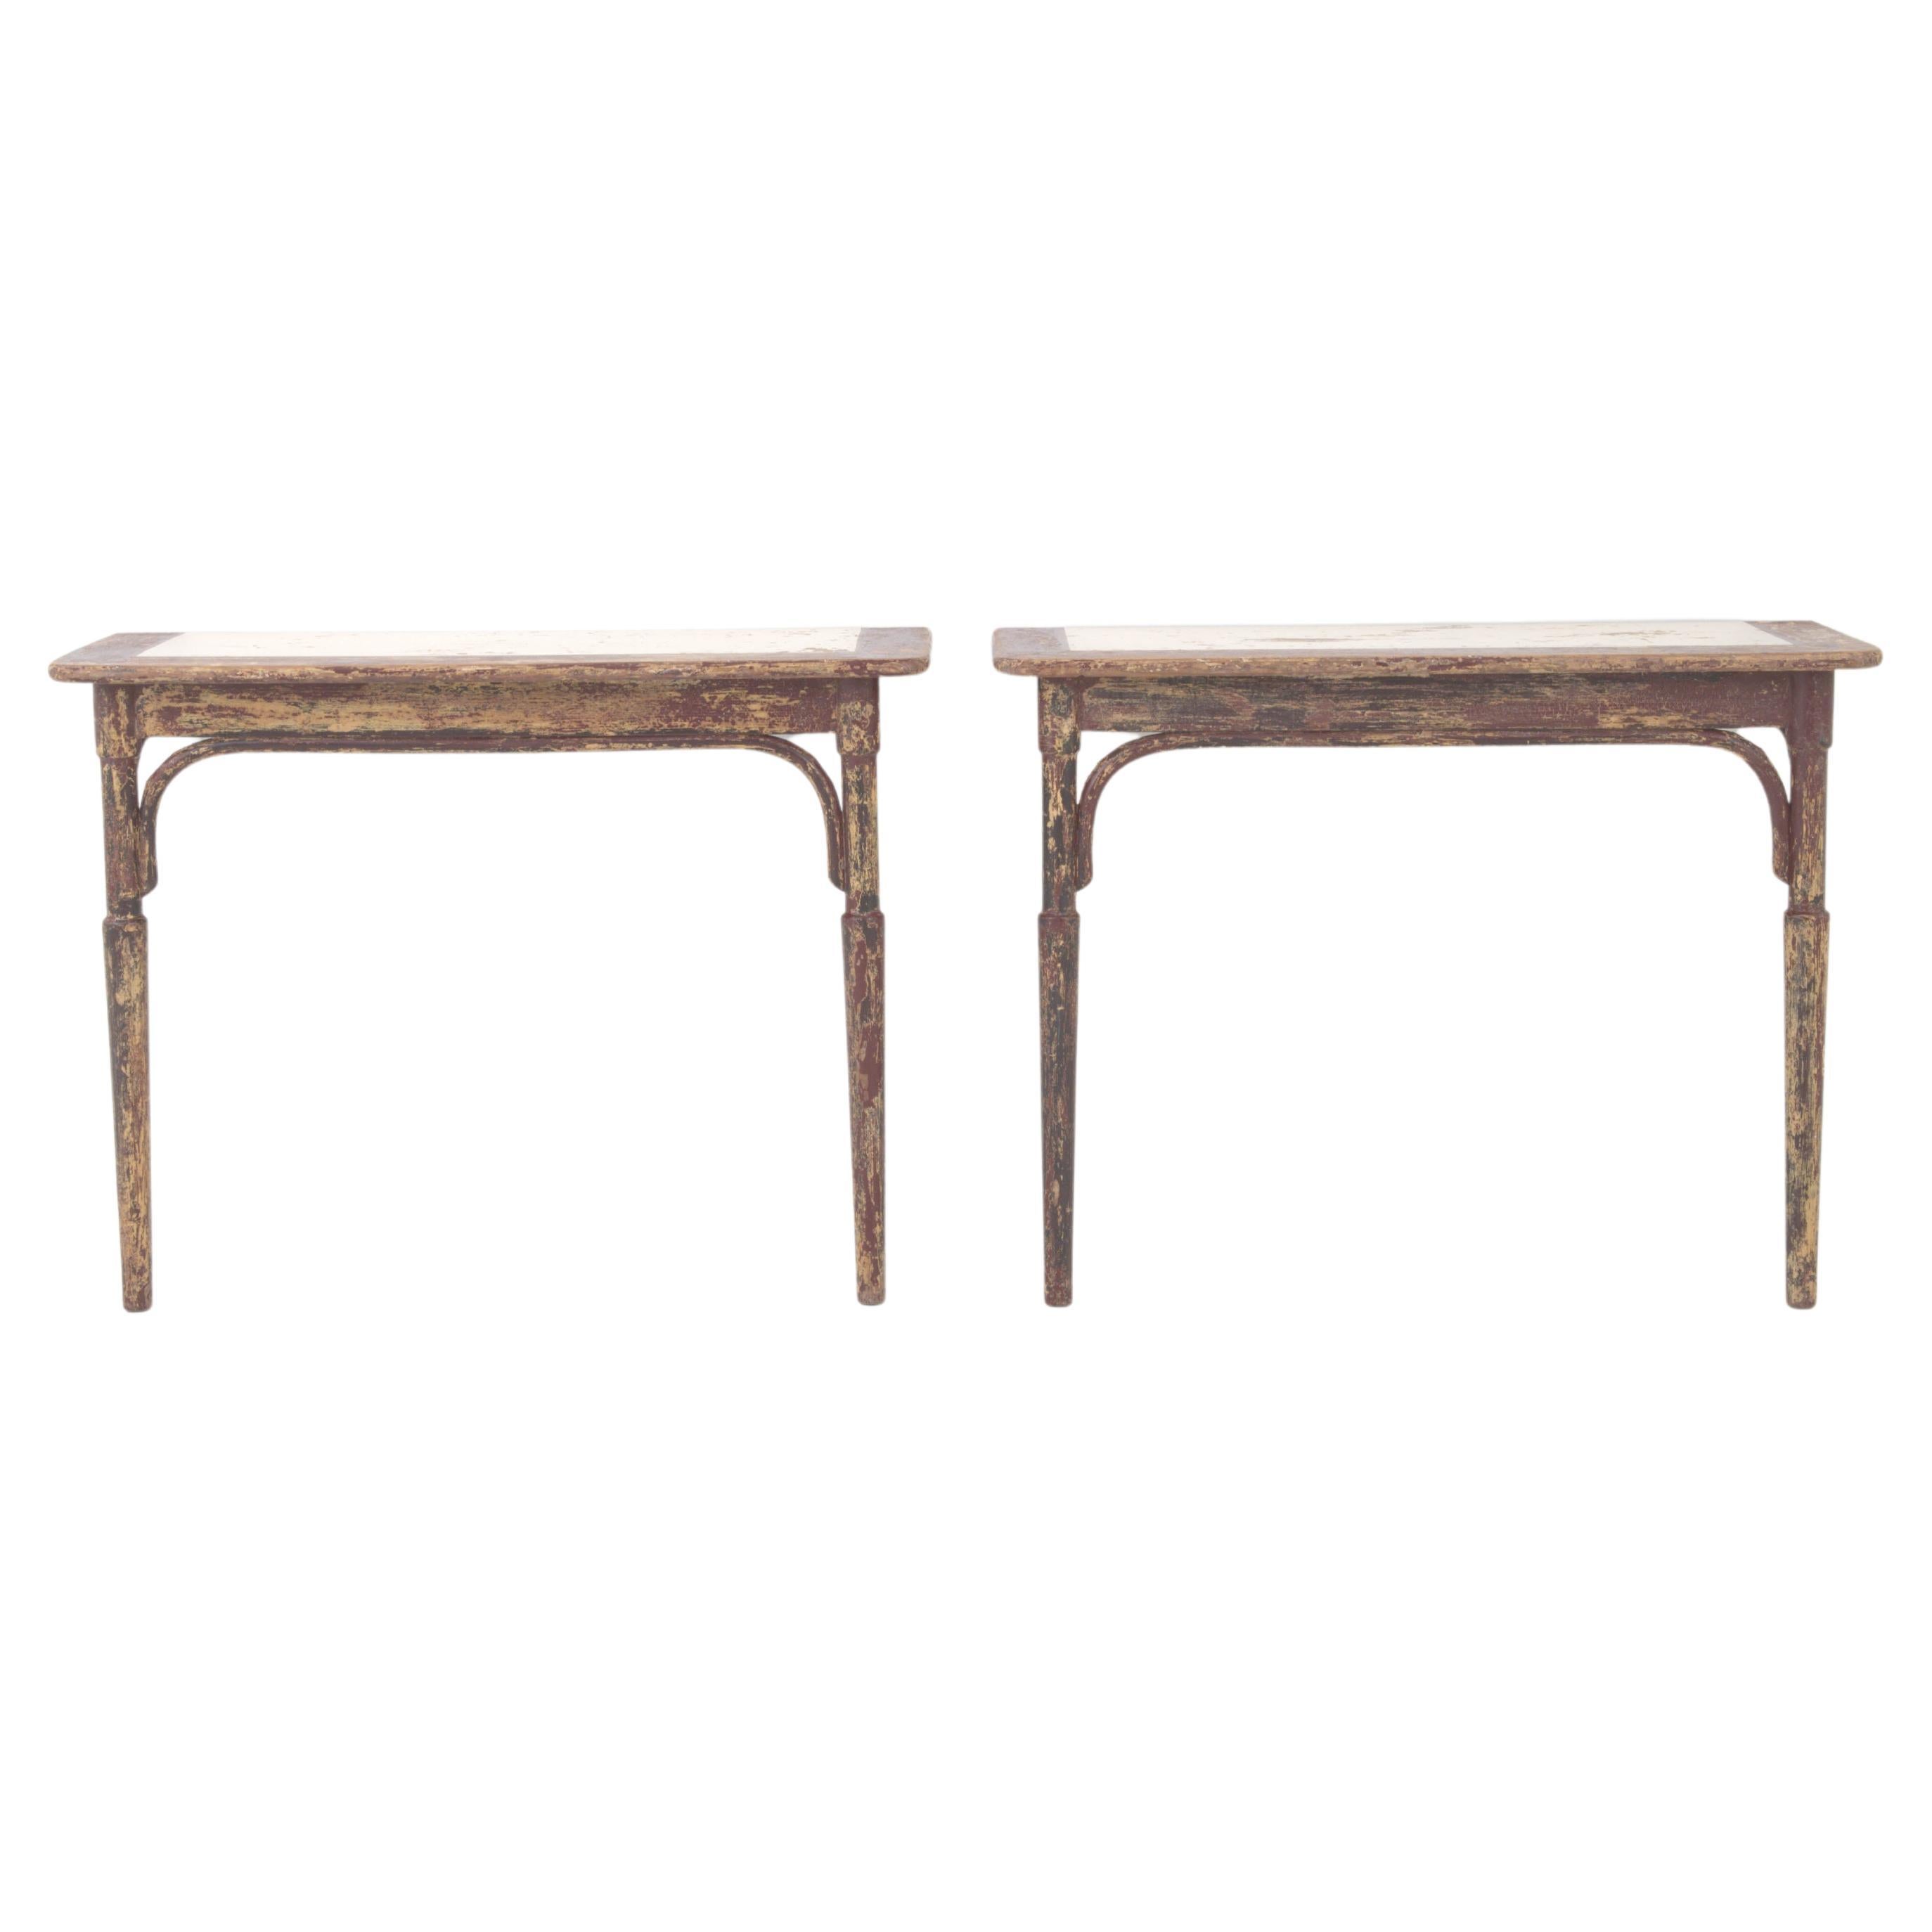 Early 20th Century French Wood Patinated Console Tables By Thonet, a Pair